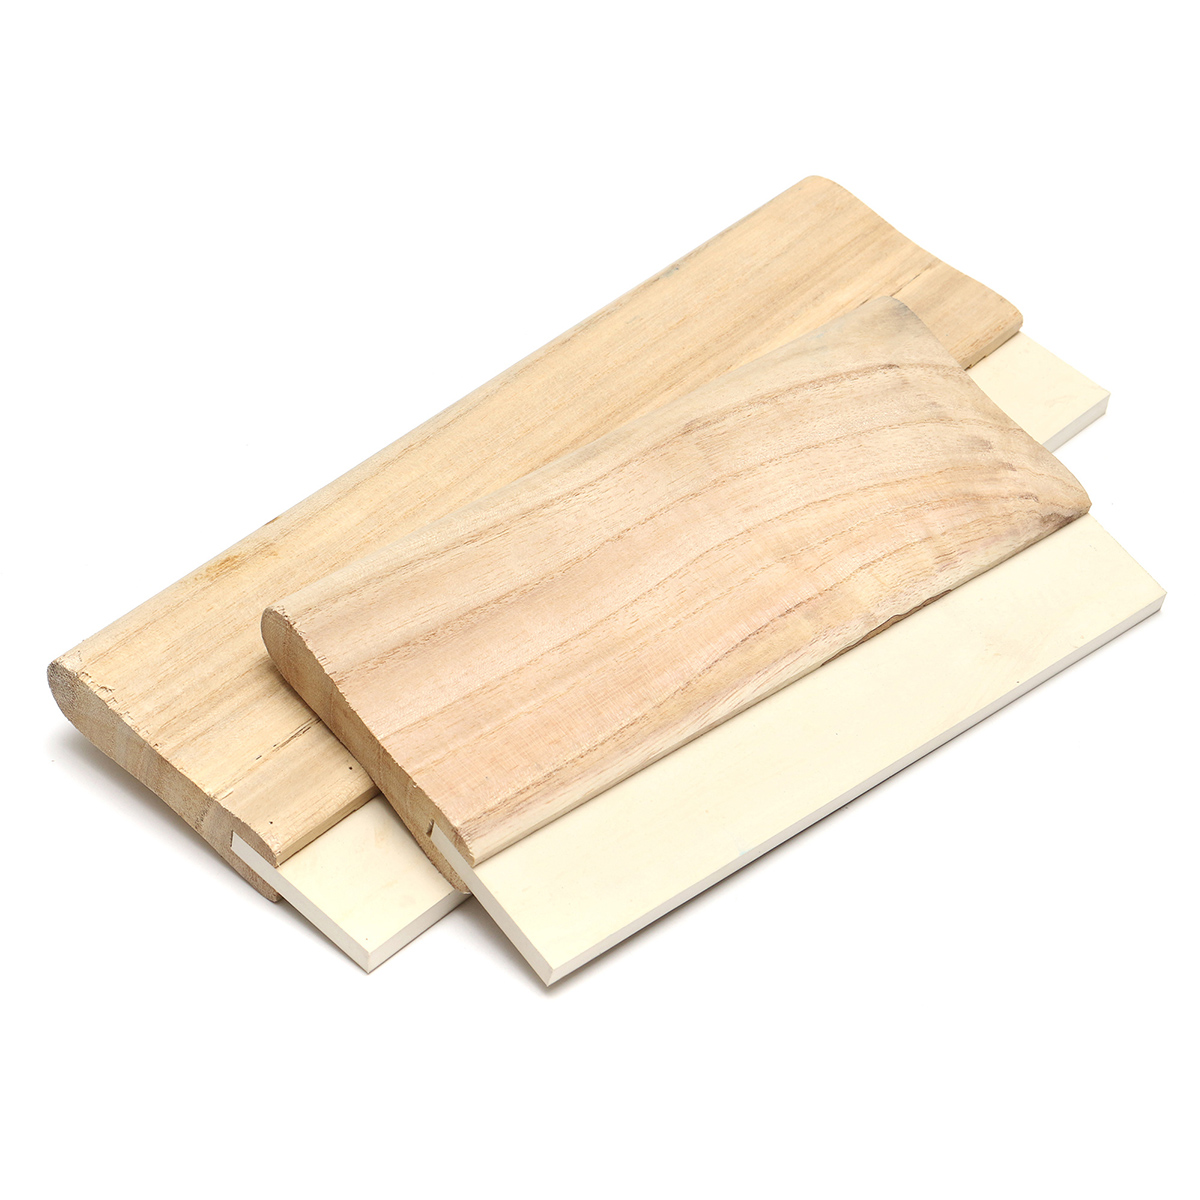 2-Sizes-A4A3-Wooden-Handle-Rubber-Blade-for-Screen-Printing-Squeegee-1113705-7